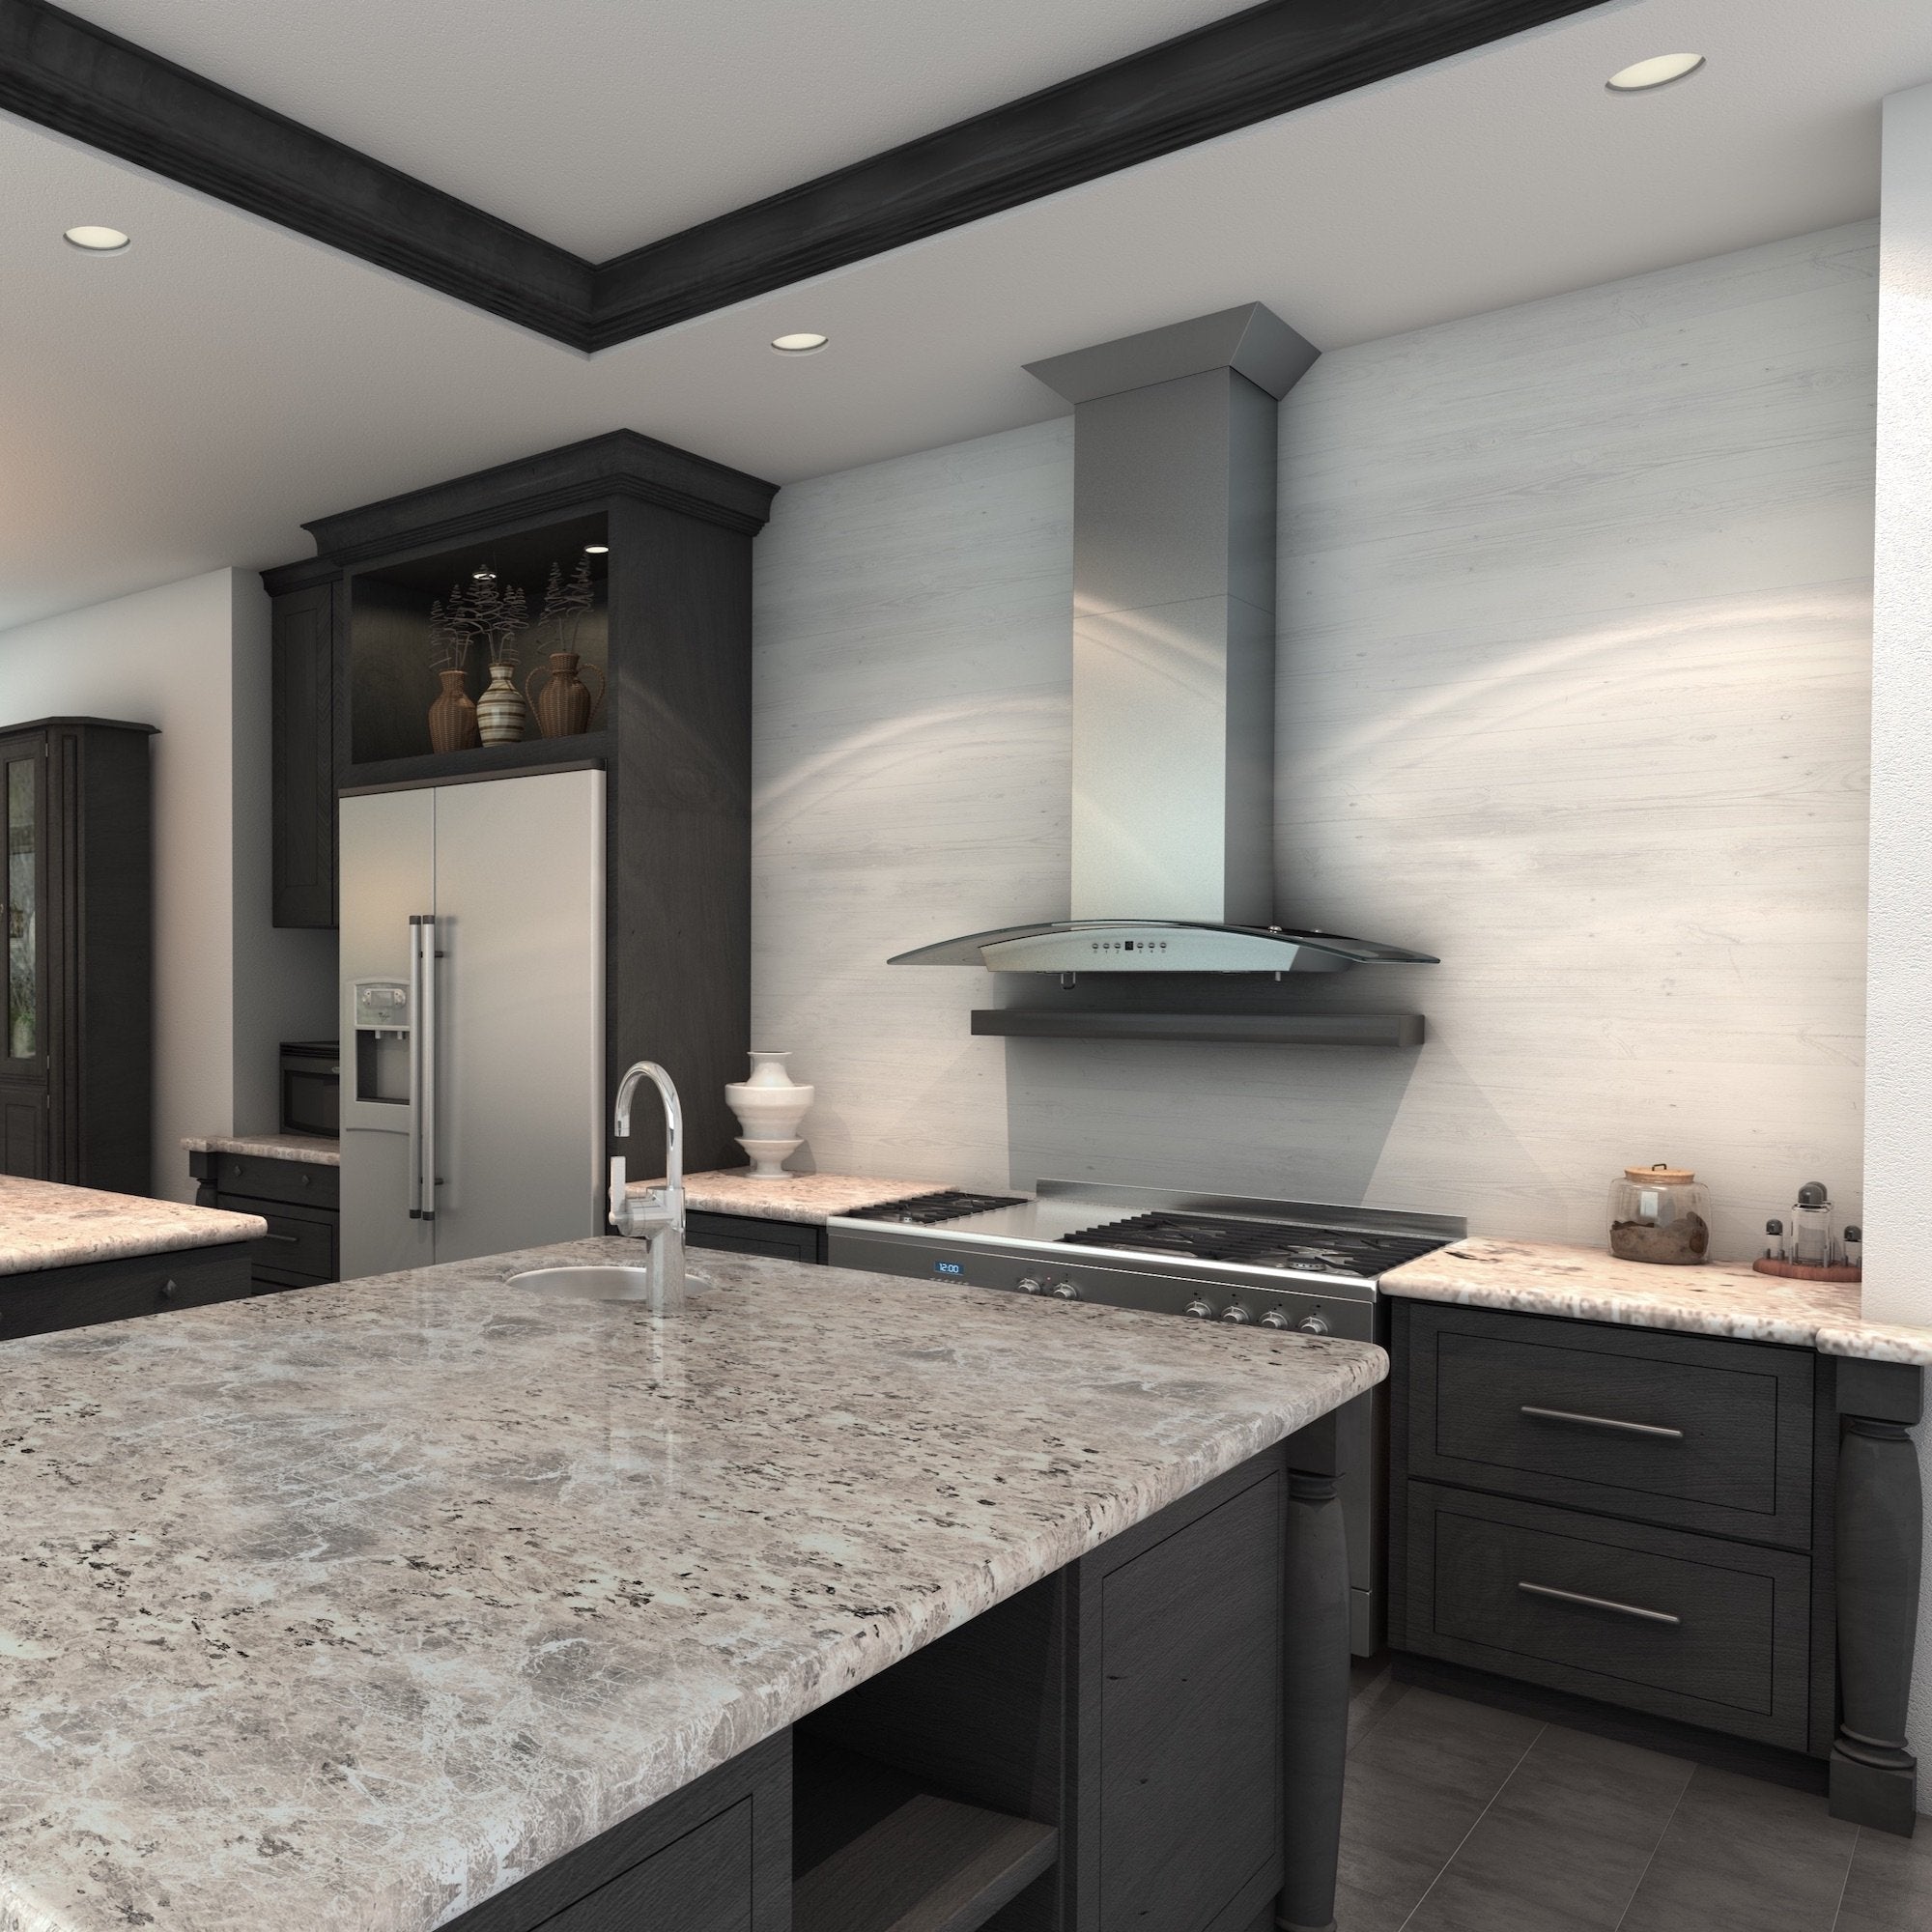 ZLINE Convertible Vent Wall Mount Range Hood in Stainless Steel & Glass (KZ) in a luxury kitchen above a large range.